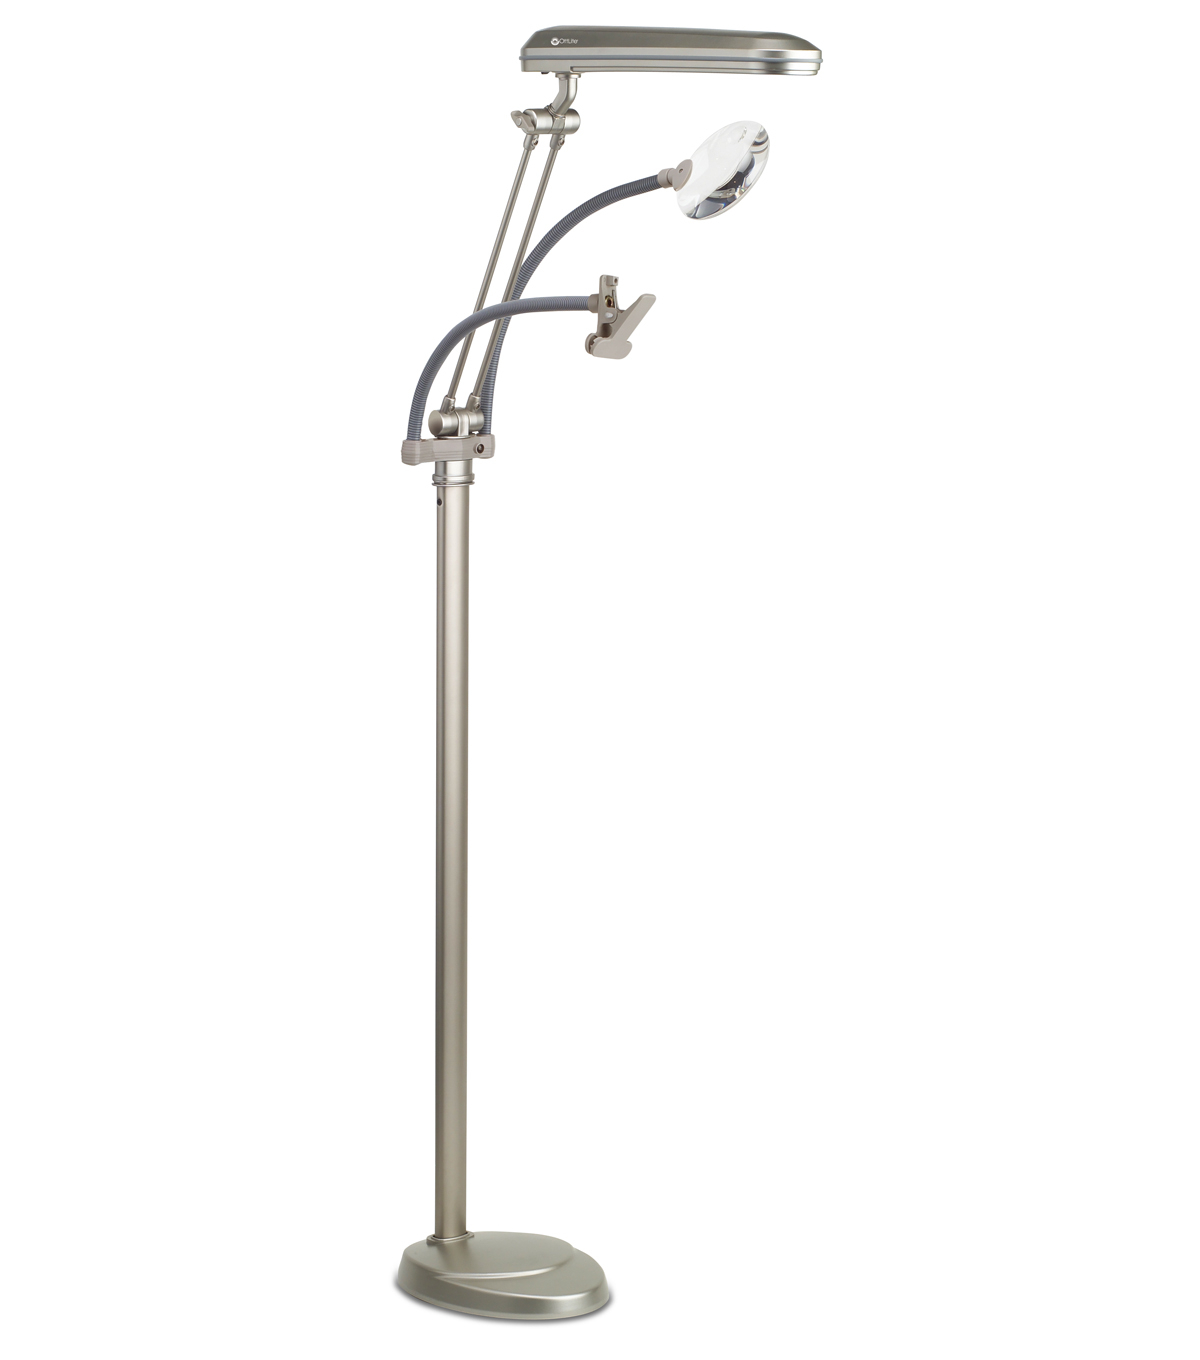 Ottlite 24w 3 In 1 Craft Floor Lamp intended for size 1200 X 1360